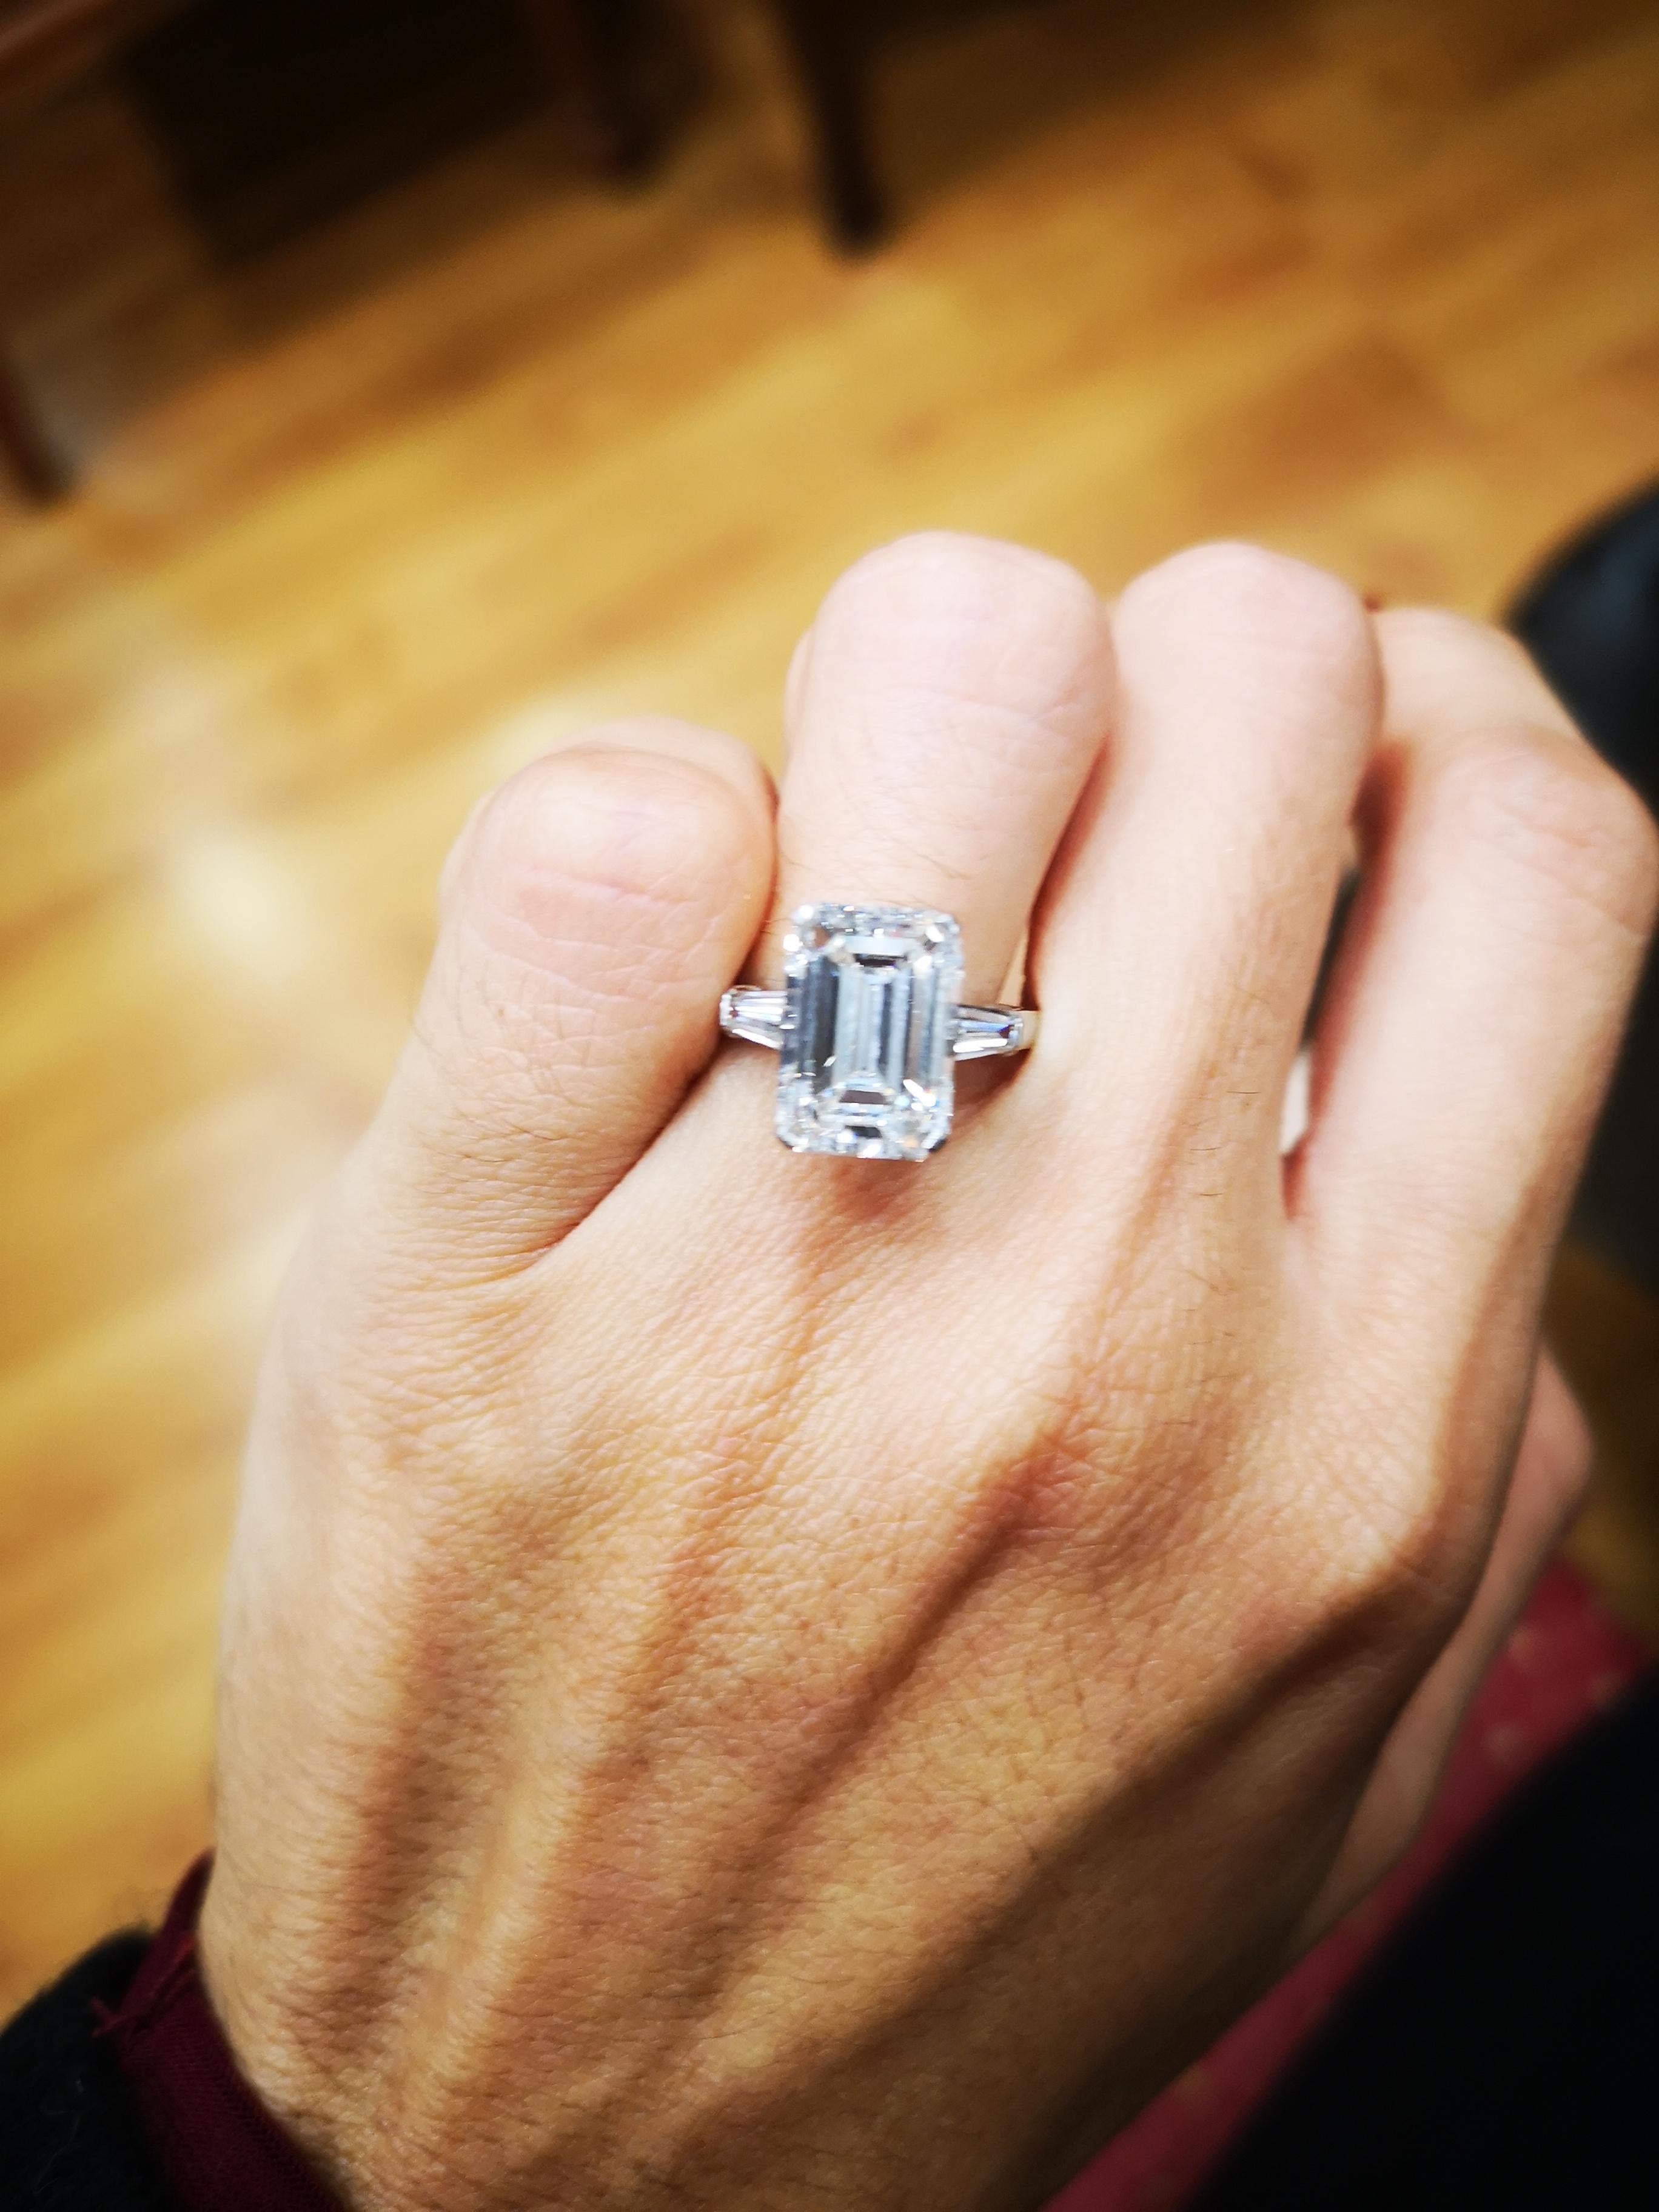 An important and classic engagement ring showcasing a 7 carat emerald cut diamond certified by GIA as J color, VVS2 clarity. Flanking the center diamond are two smaller GIA certified tapered baguette cut diamonds weighing 0.80 carats Accent diamonds